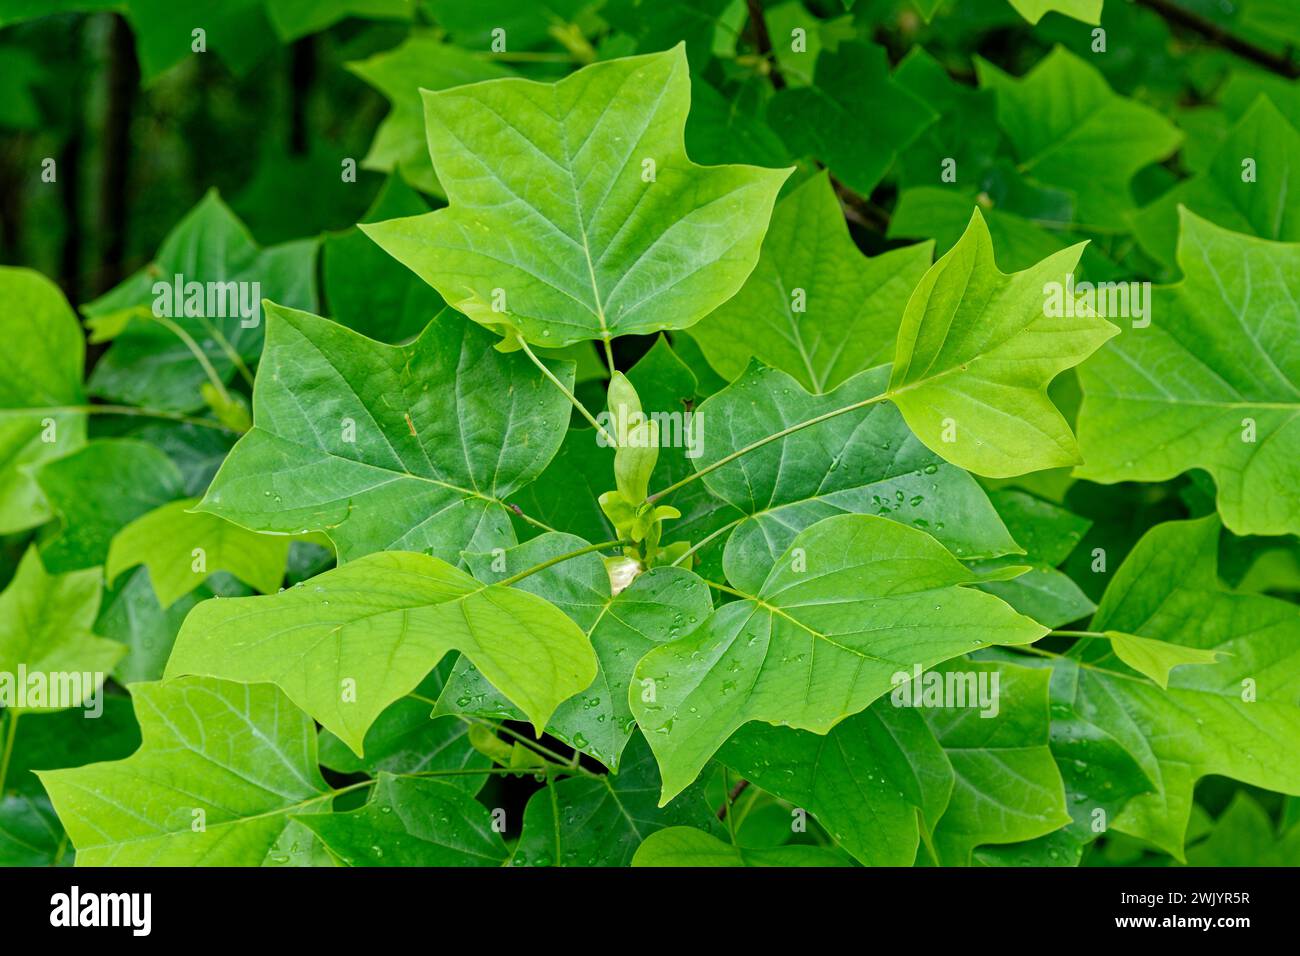 Newly opened bright green leaves on a tulip tree or poplar branch closeup view with raindrops on the surface of the leaves in springtime Stock Photo